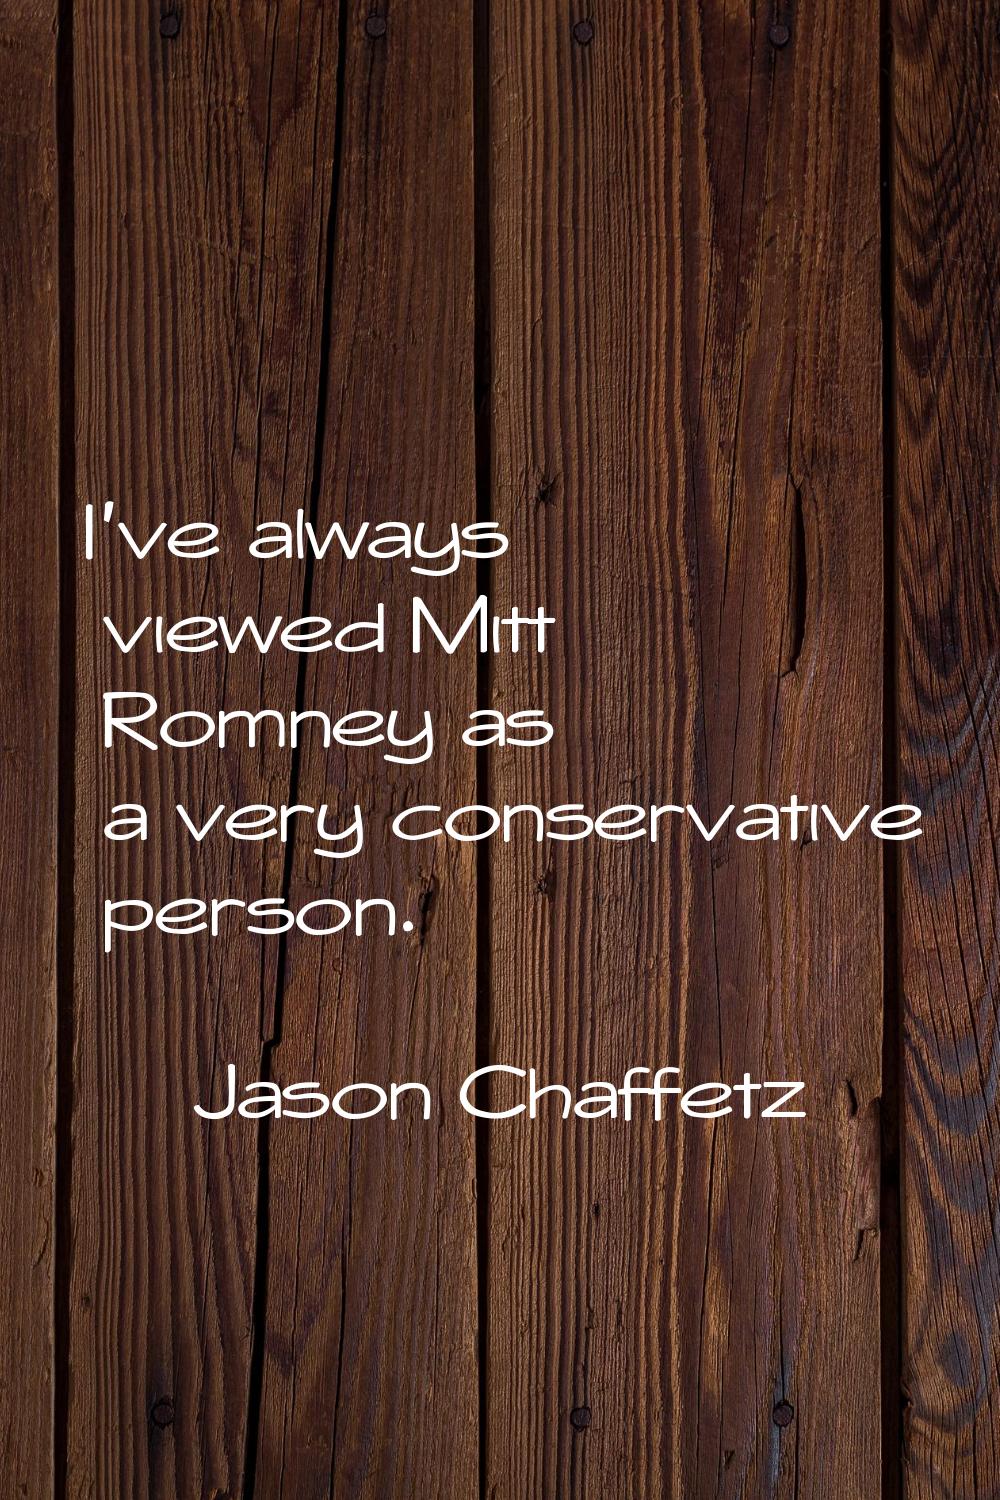 I've always viewed Mitt Romney as a very conservative person.